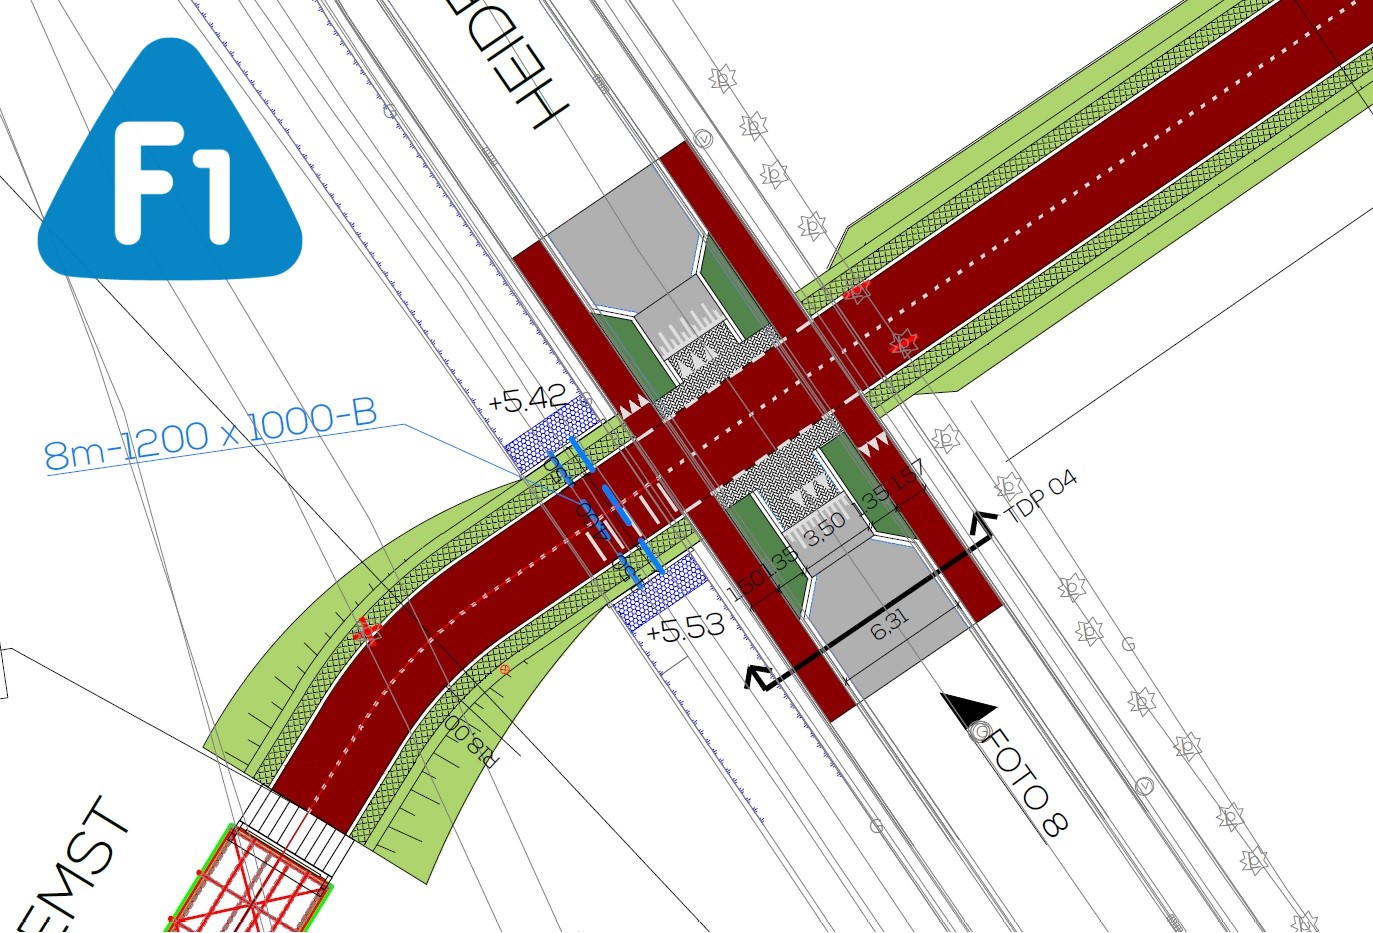 Crossing of F1 and Heidestraat in Zemst with priority for the cycle highway: narrowed carriageway and raised crossing.